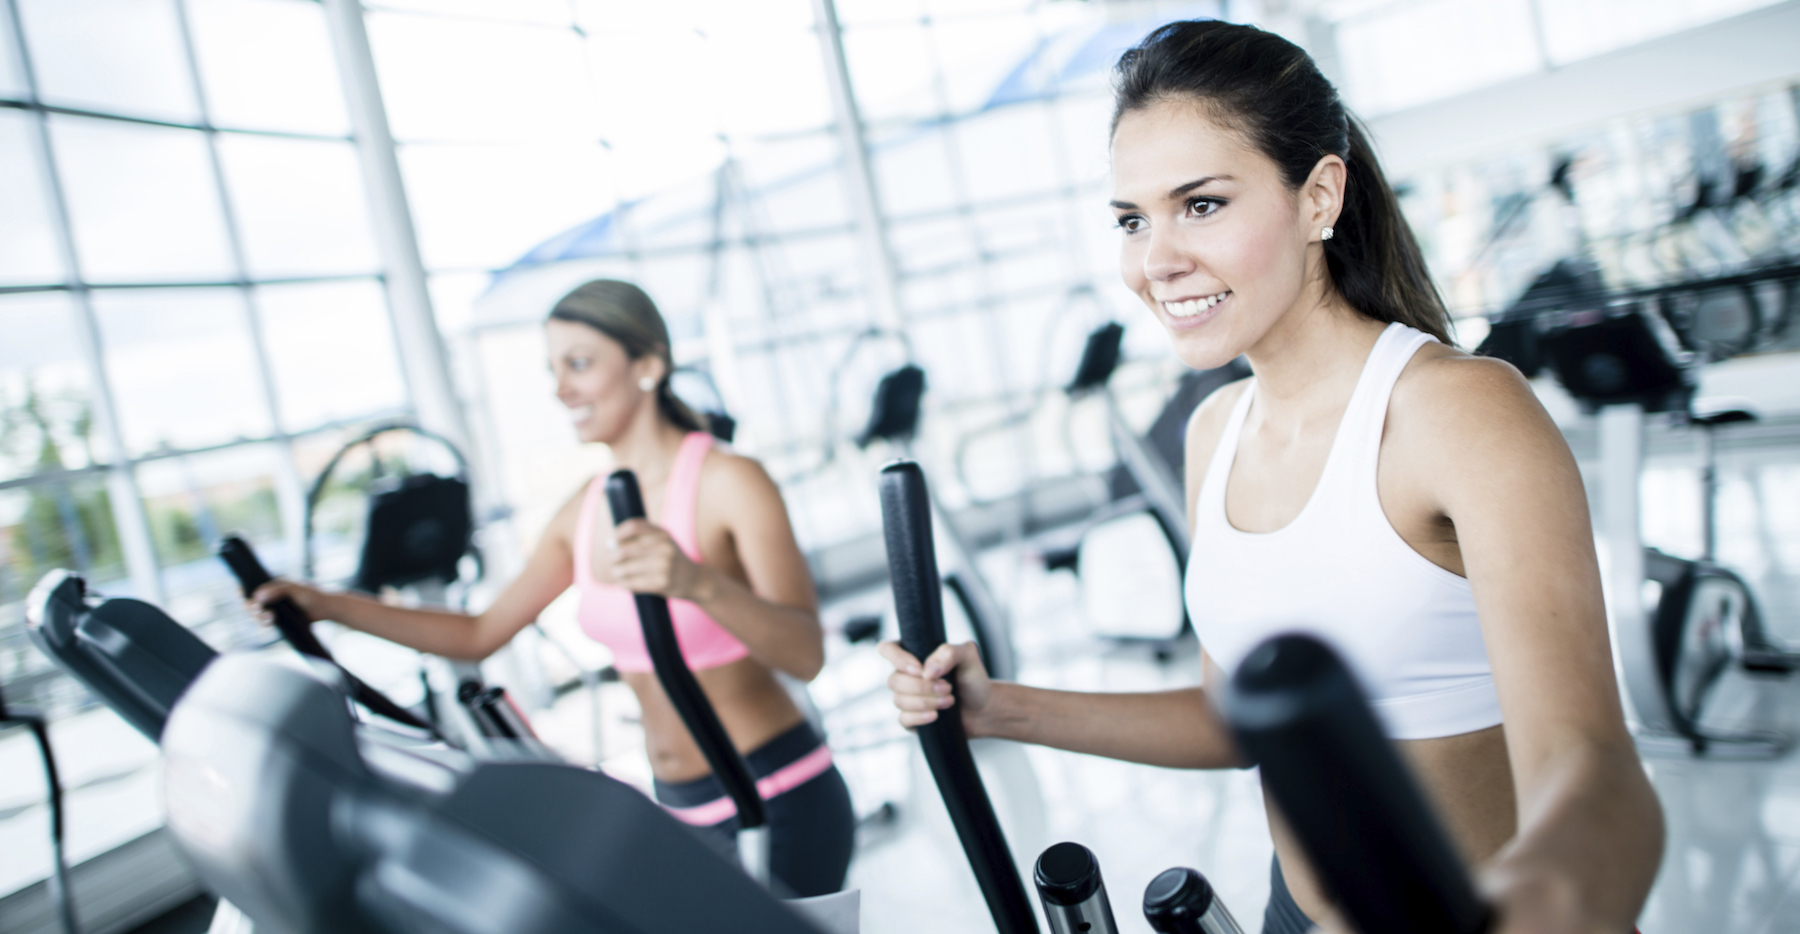 elliptical trainer handles are key to effective workouts